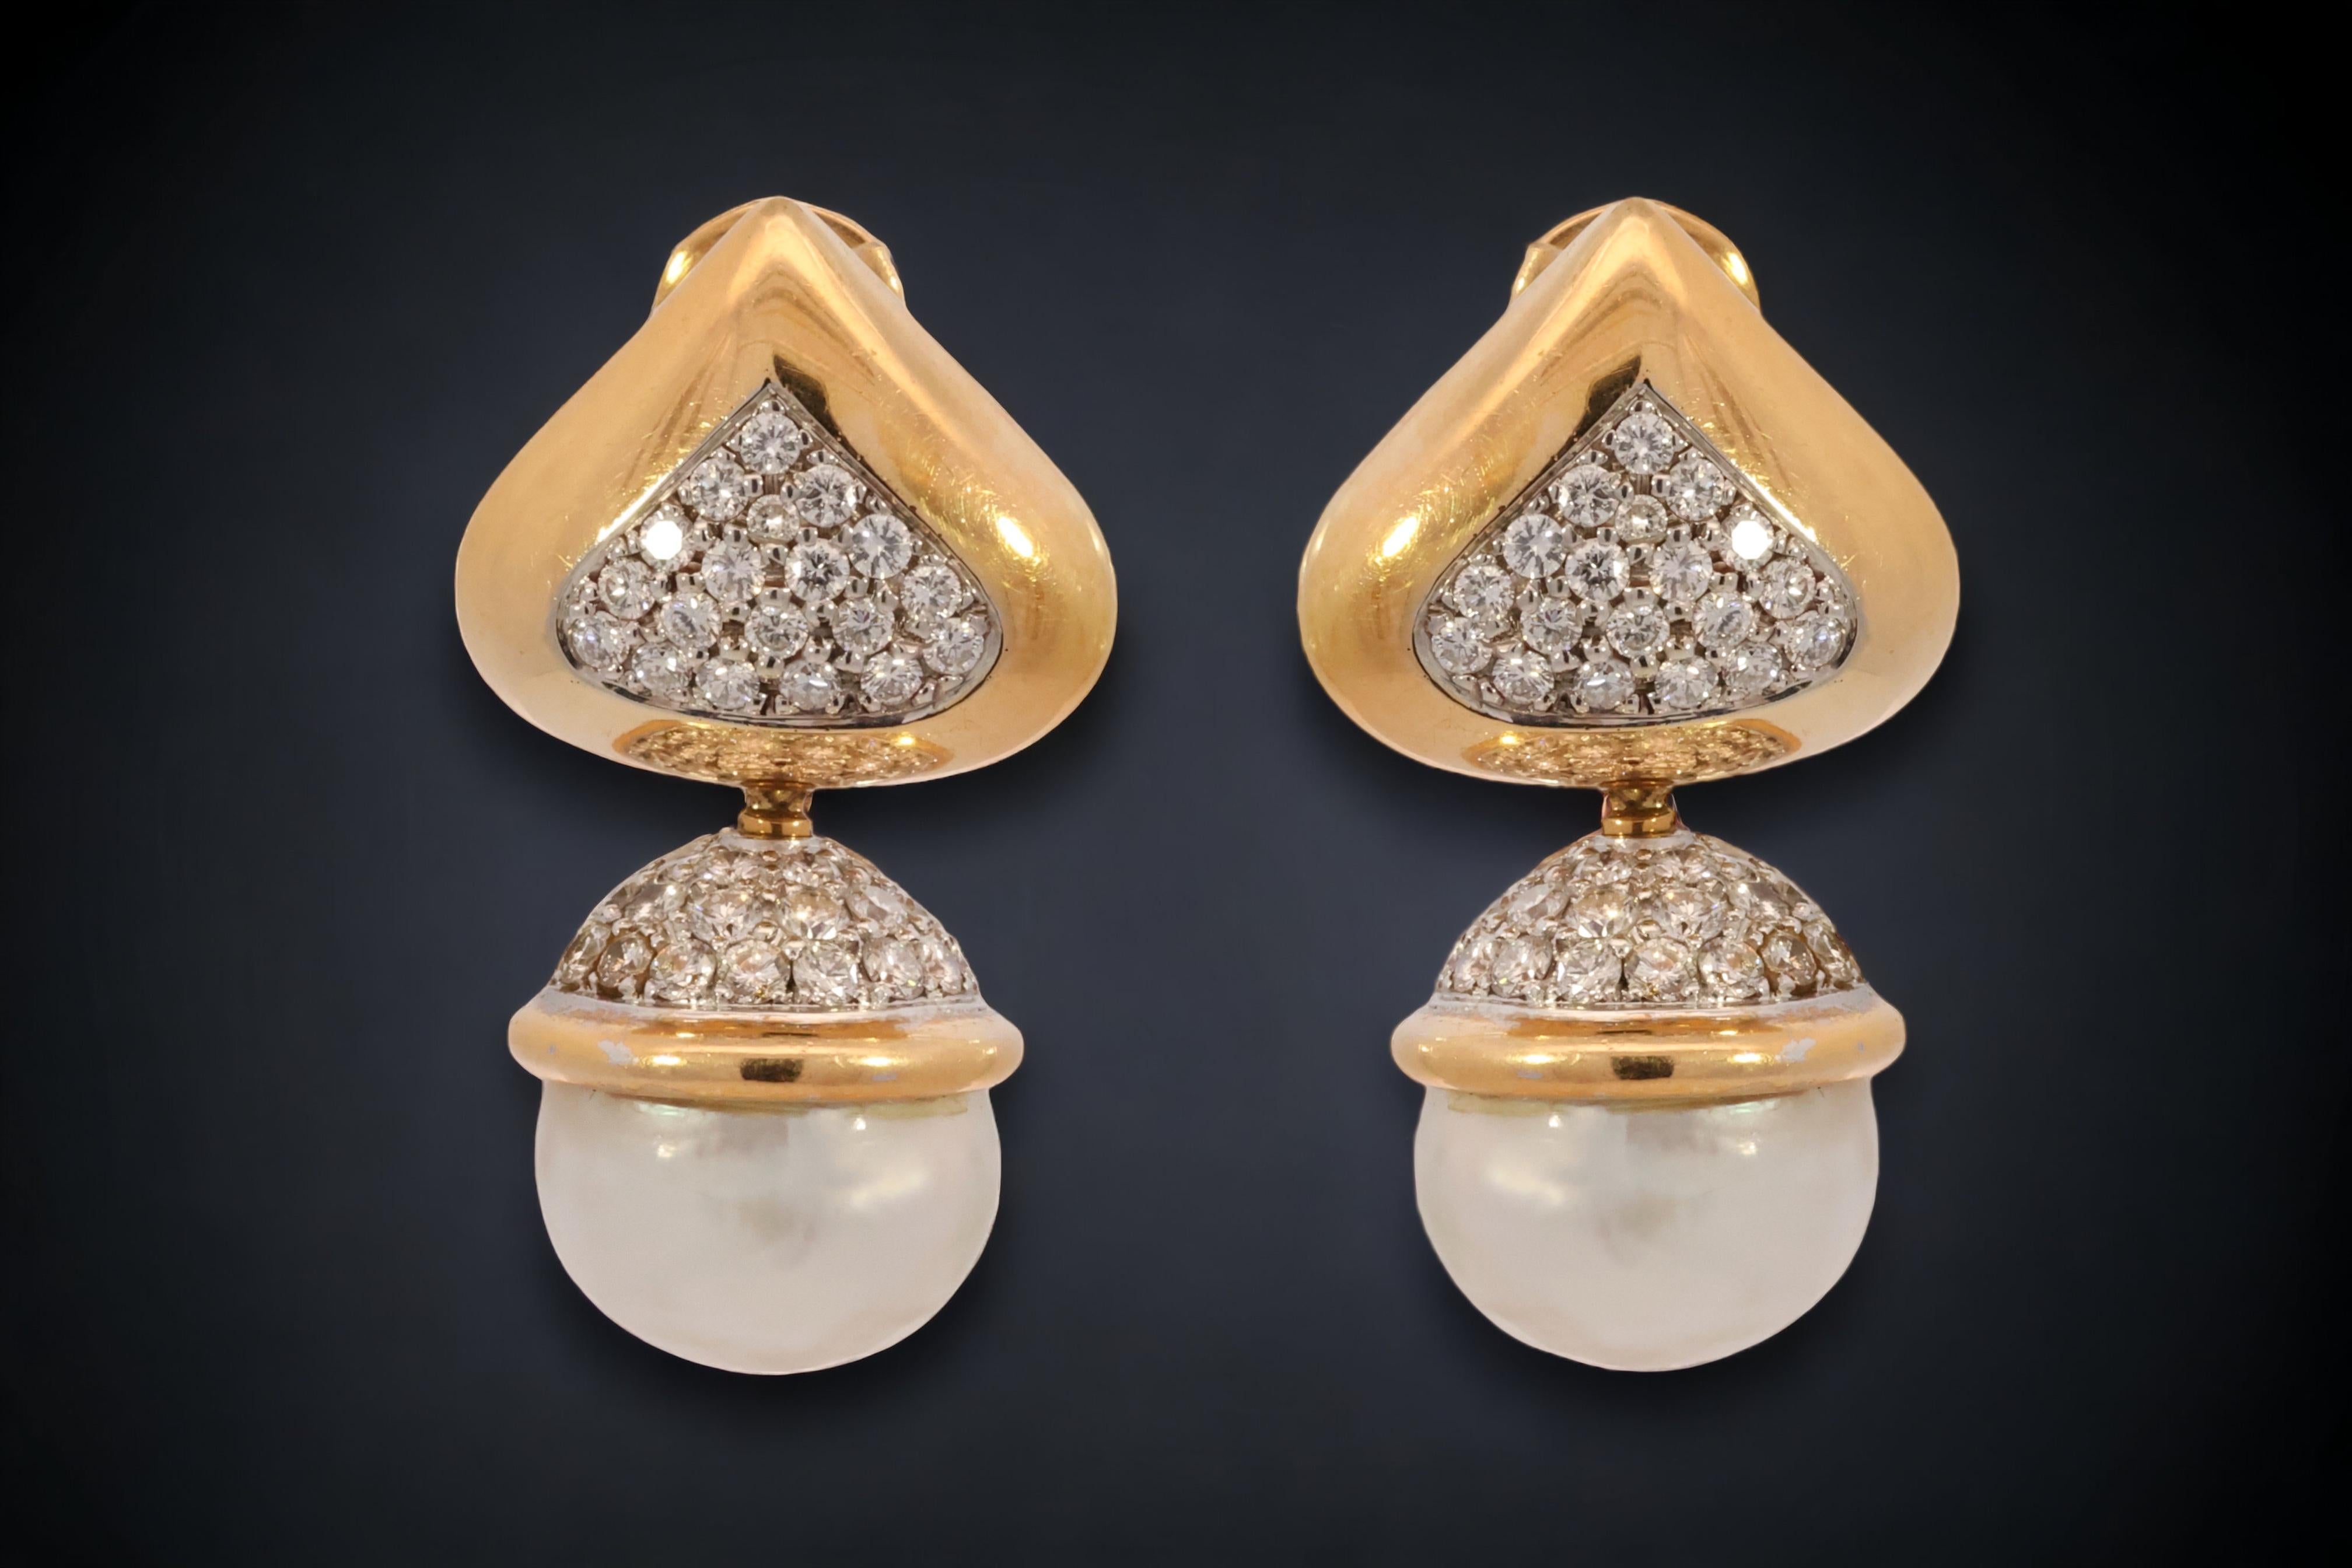 Gorgeous 18 kt. Yellow and White Gold Earrings With Big Mabé Pearls and 2.4 ct. Diamonds 

Diamond: brilliant cut diamonds together approx. 2.4 ct.

Pearl:  2 Mabe Pearls diameter 14 mm

Material: 18 kt. yellow and white gold 

Measurements: 35.5 mm